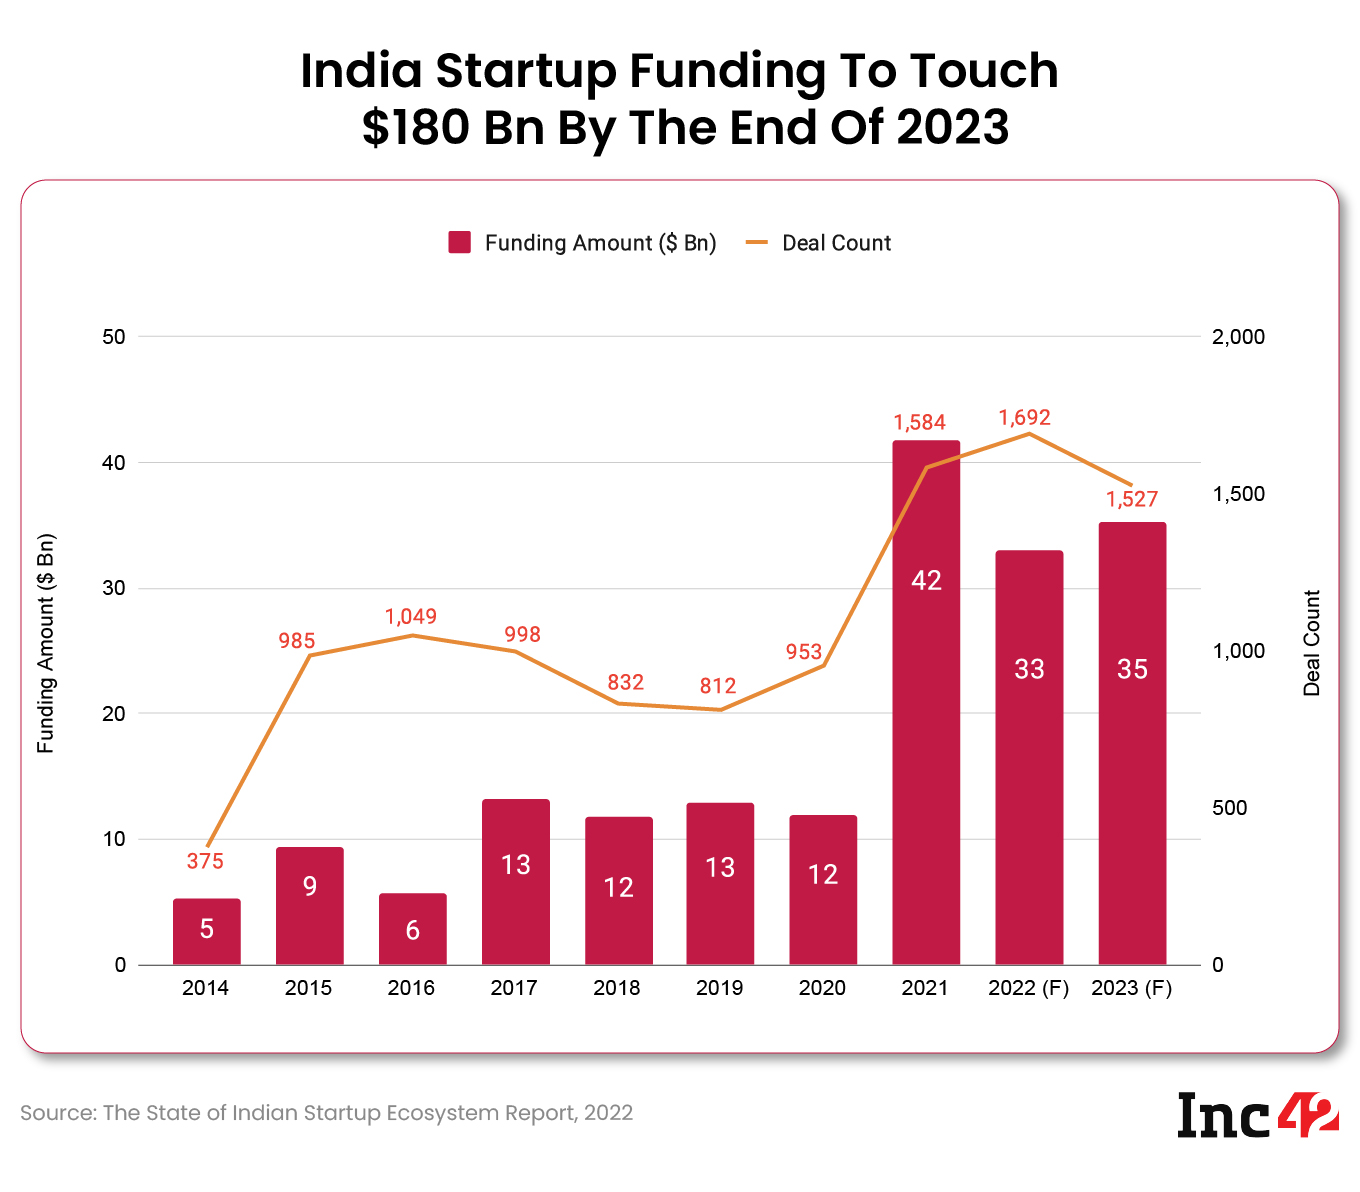 Total funding in Indian startups to reach $180 Bn by the end of 2023: report